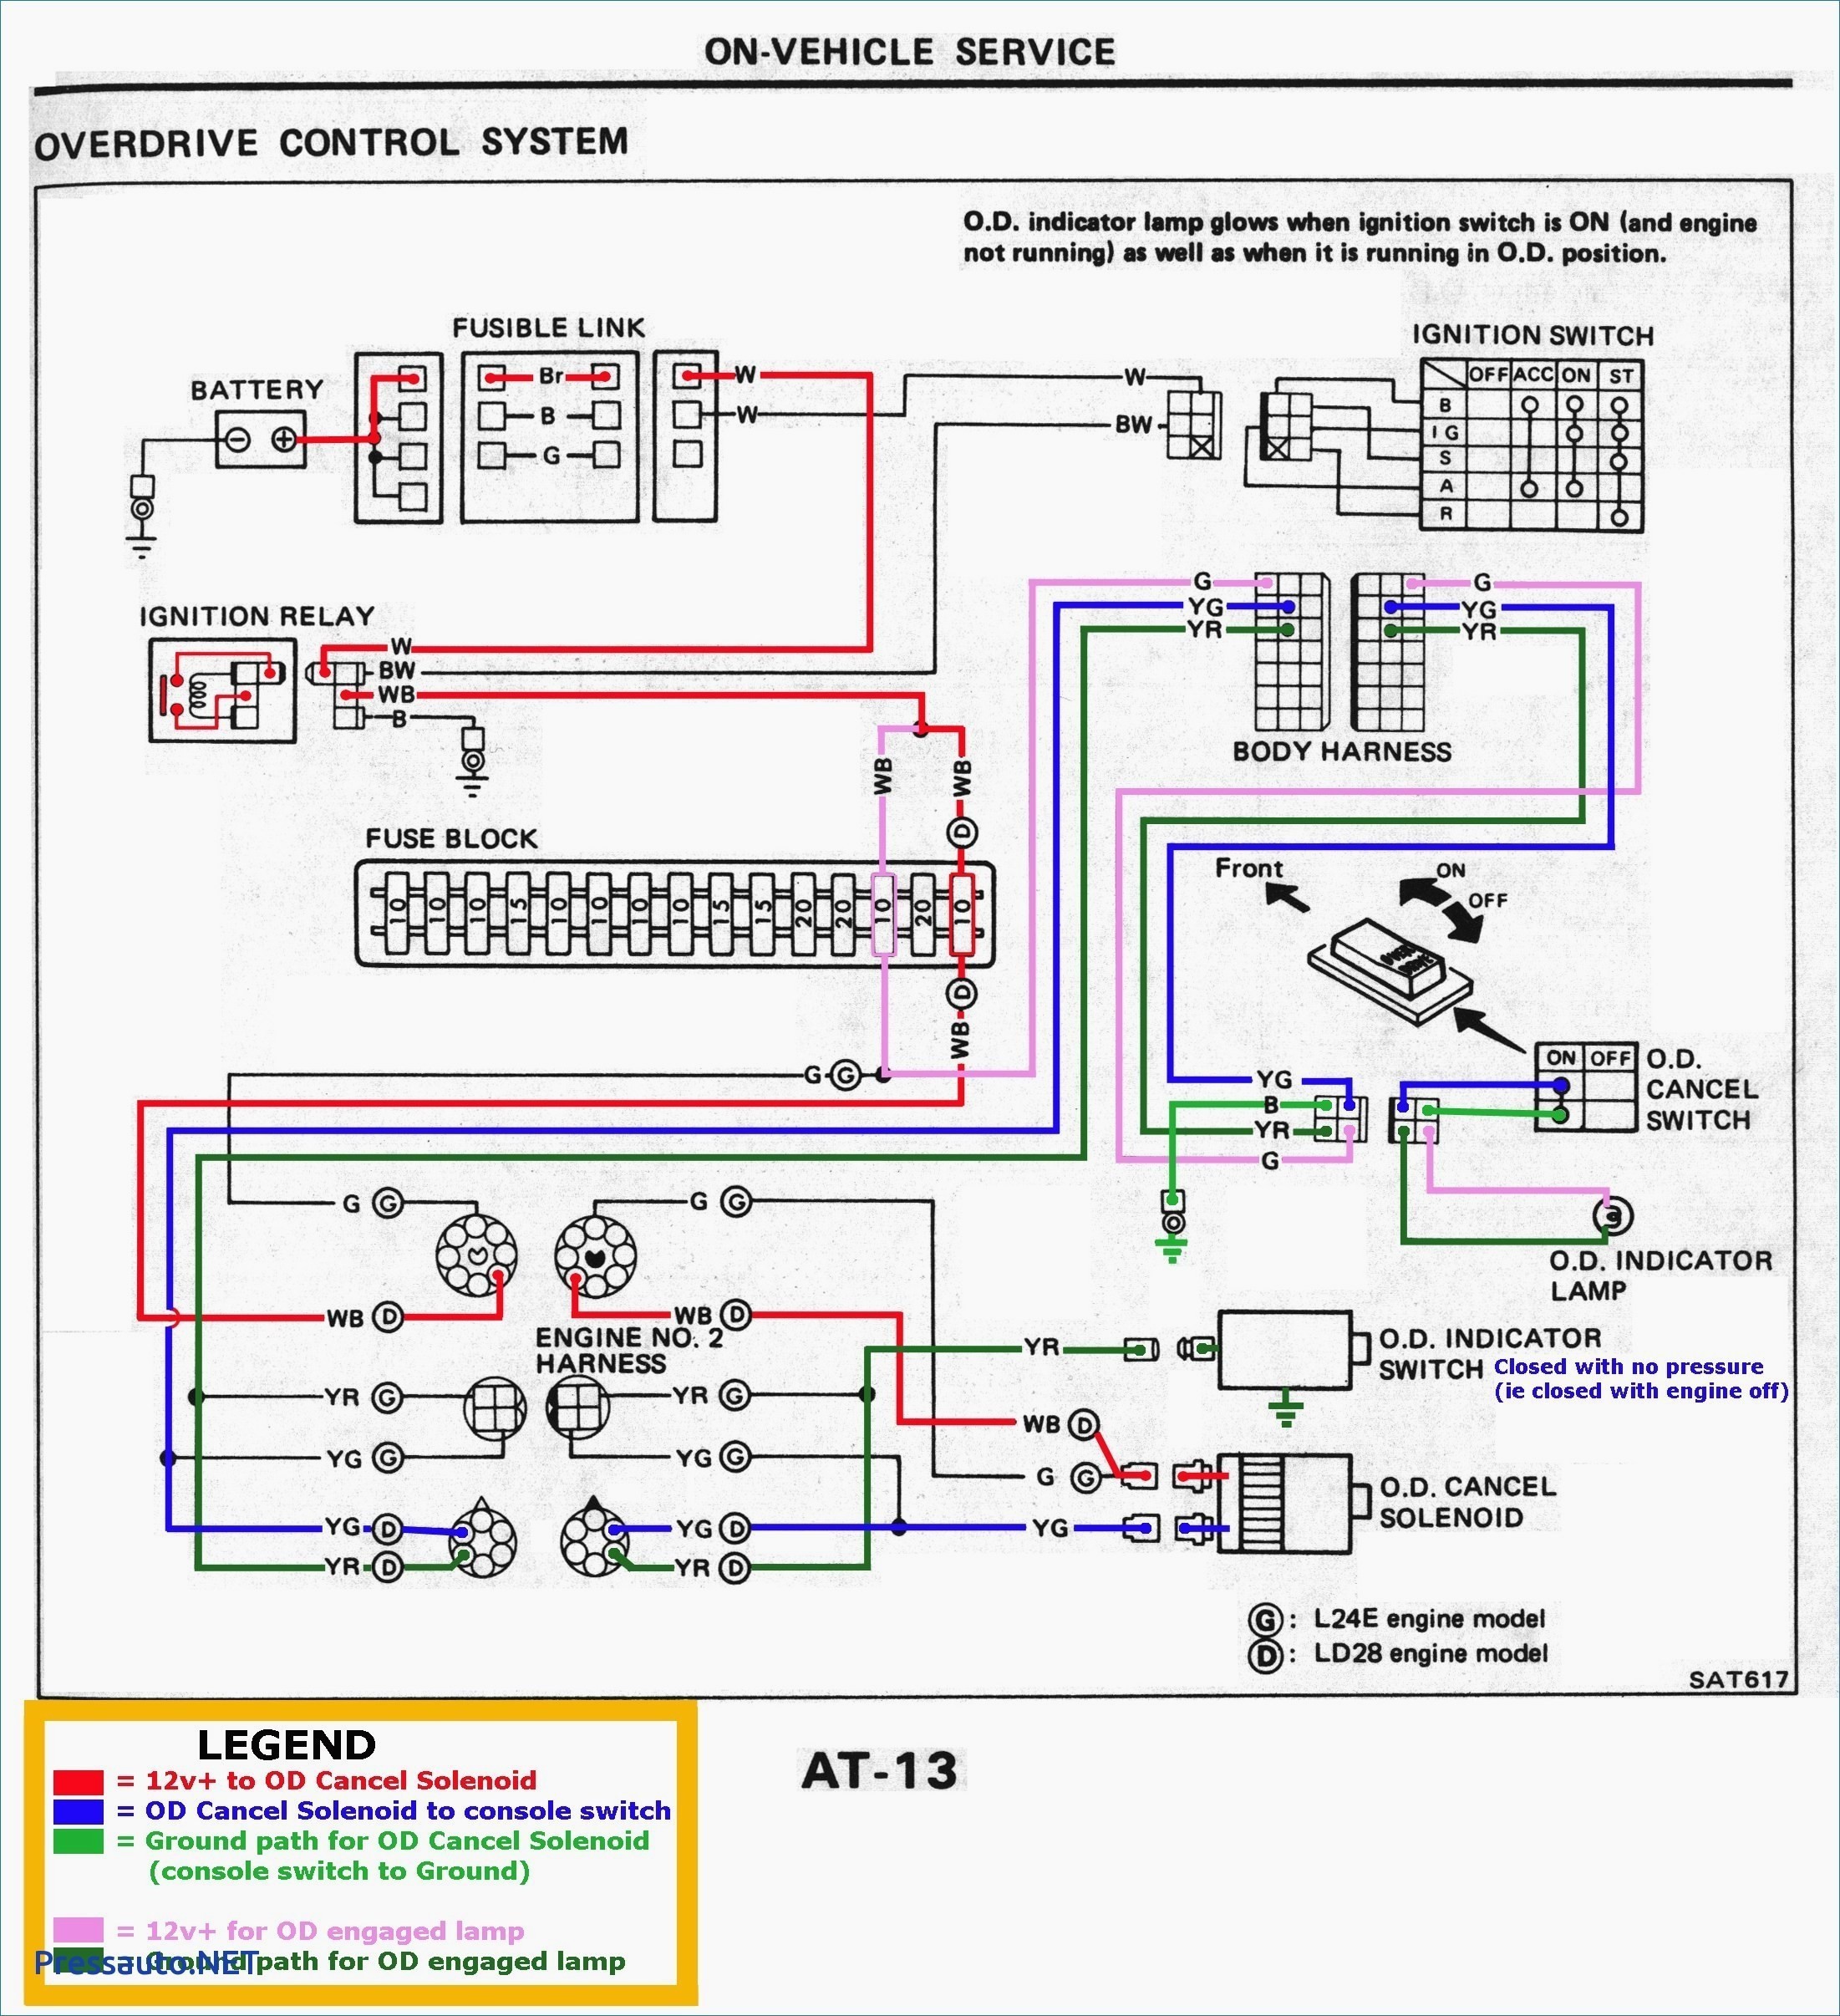 Ford 4 2 Engine Diagram 1987 ford F150 Ignition Wiring Diagram Rate Ks6180 Ignition Switch Of Ford 4 2 Engine Diagram